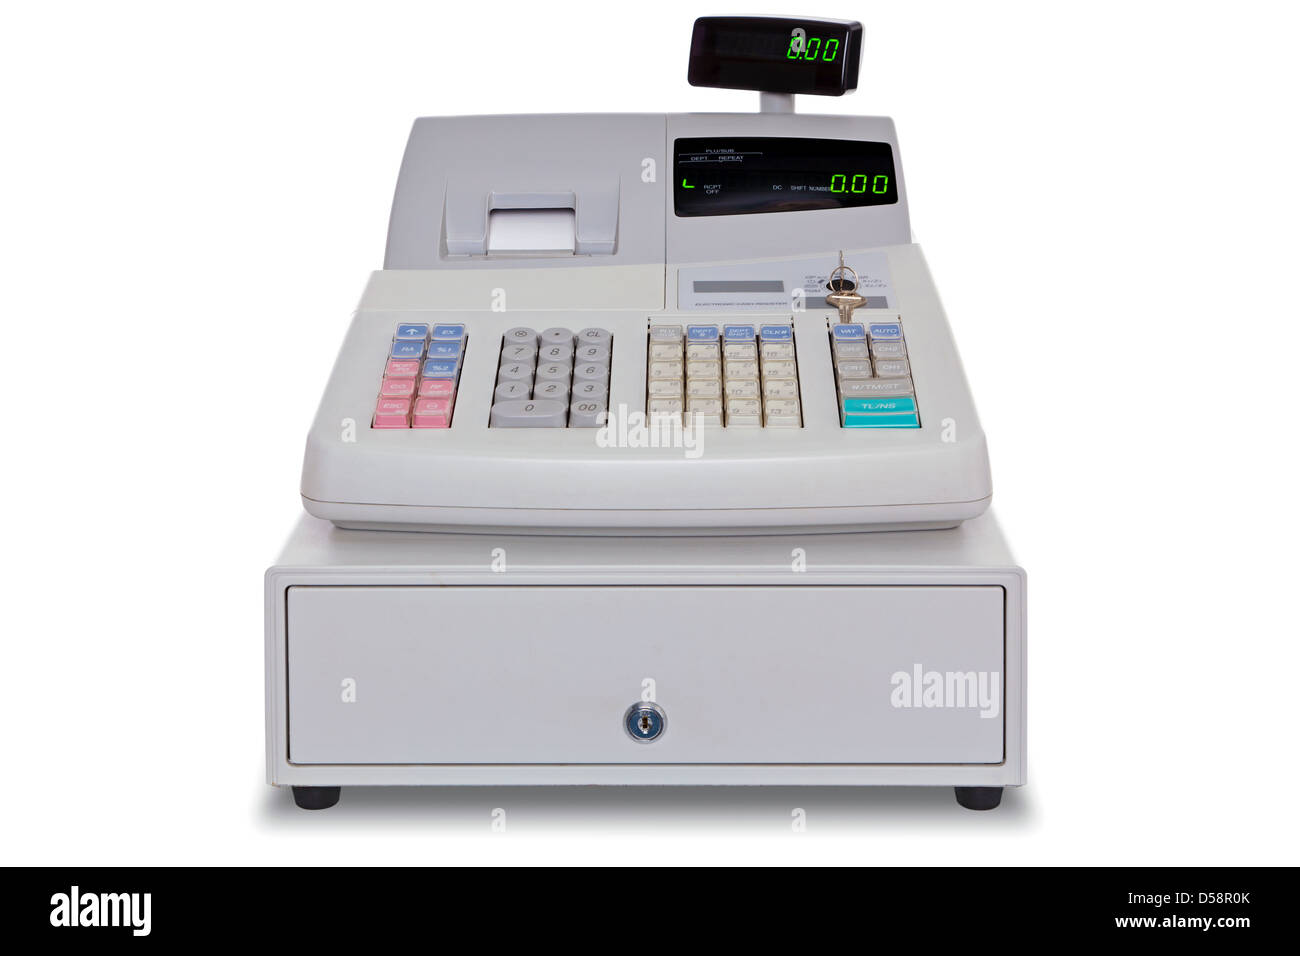 Electronic cash register isolated on a white background with clipping path. Stock Photo